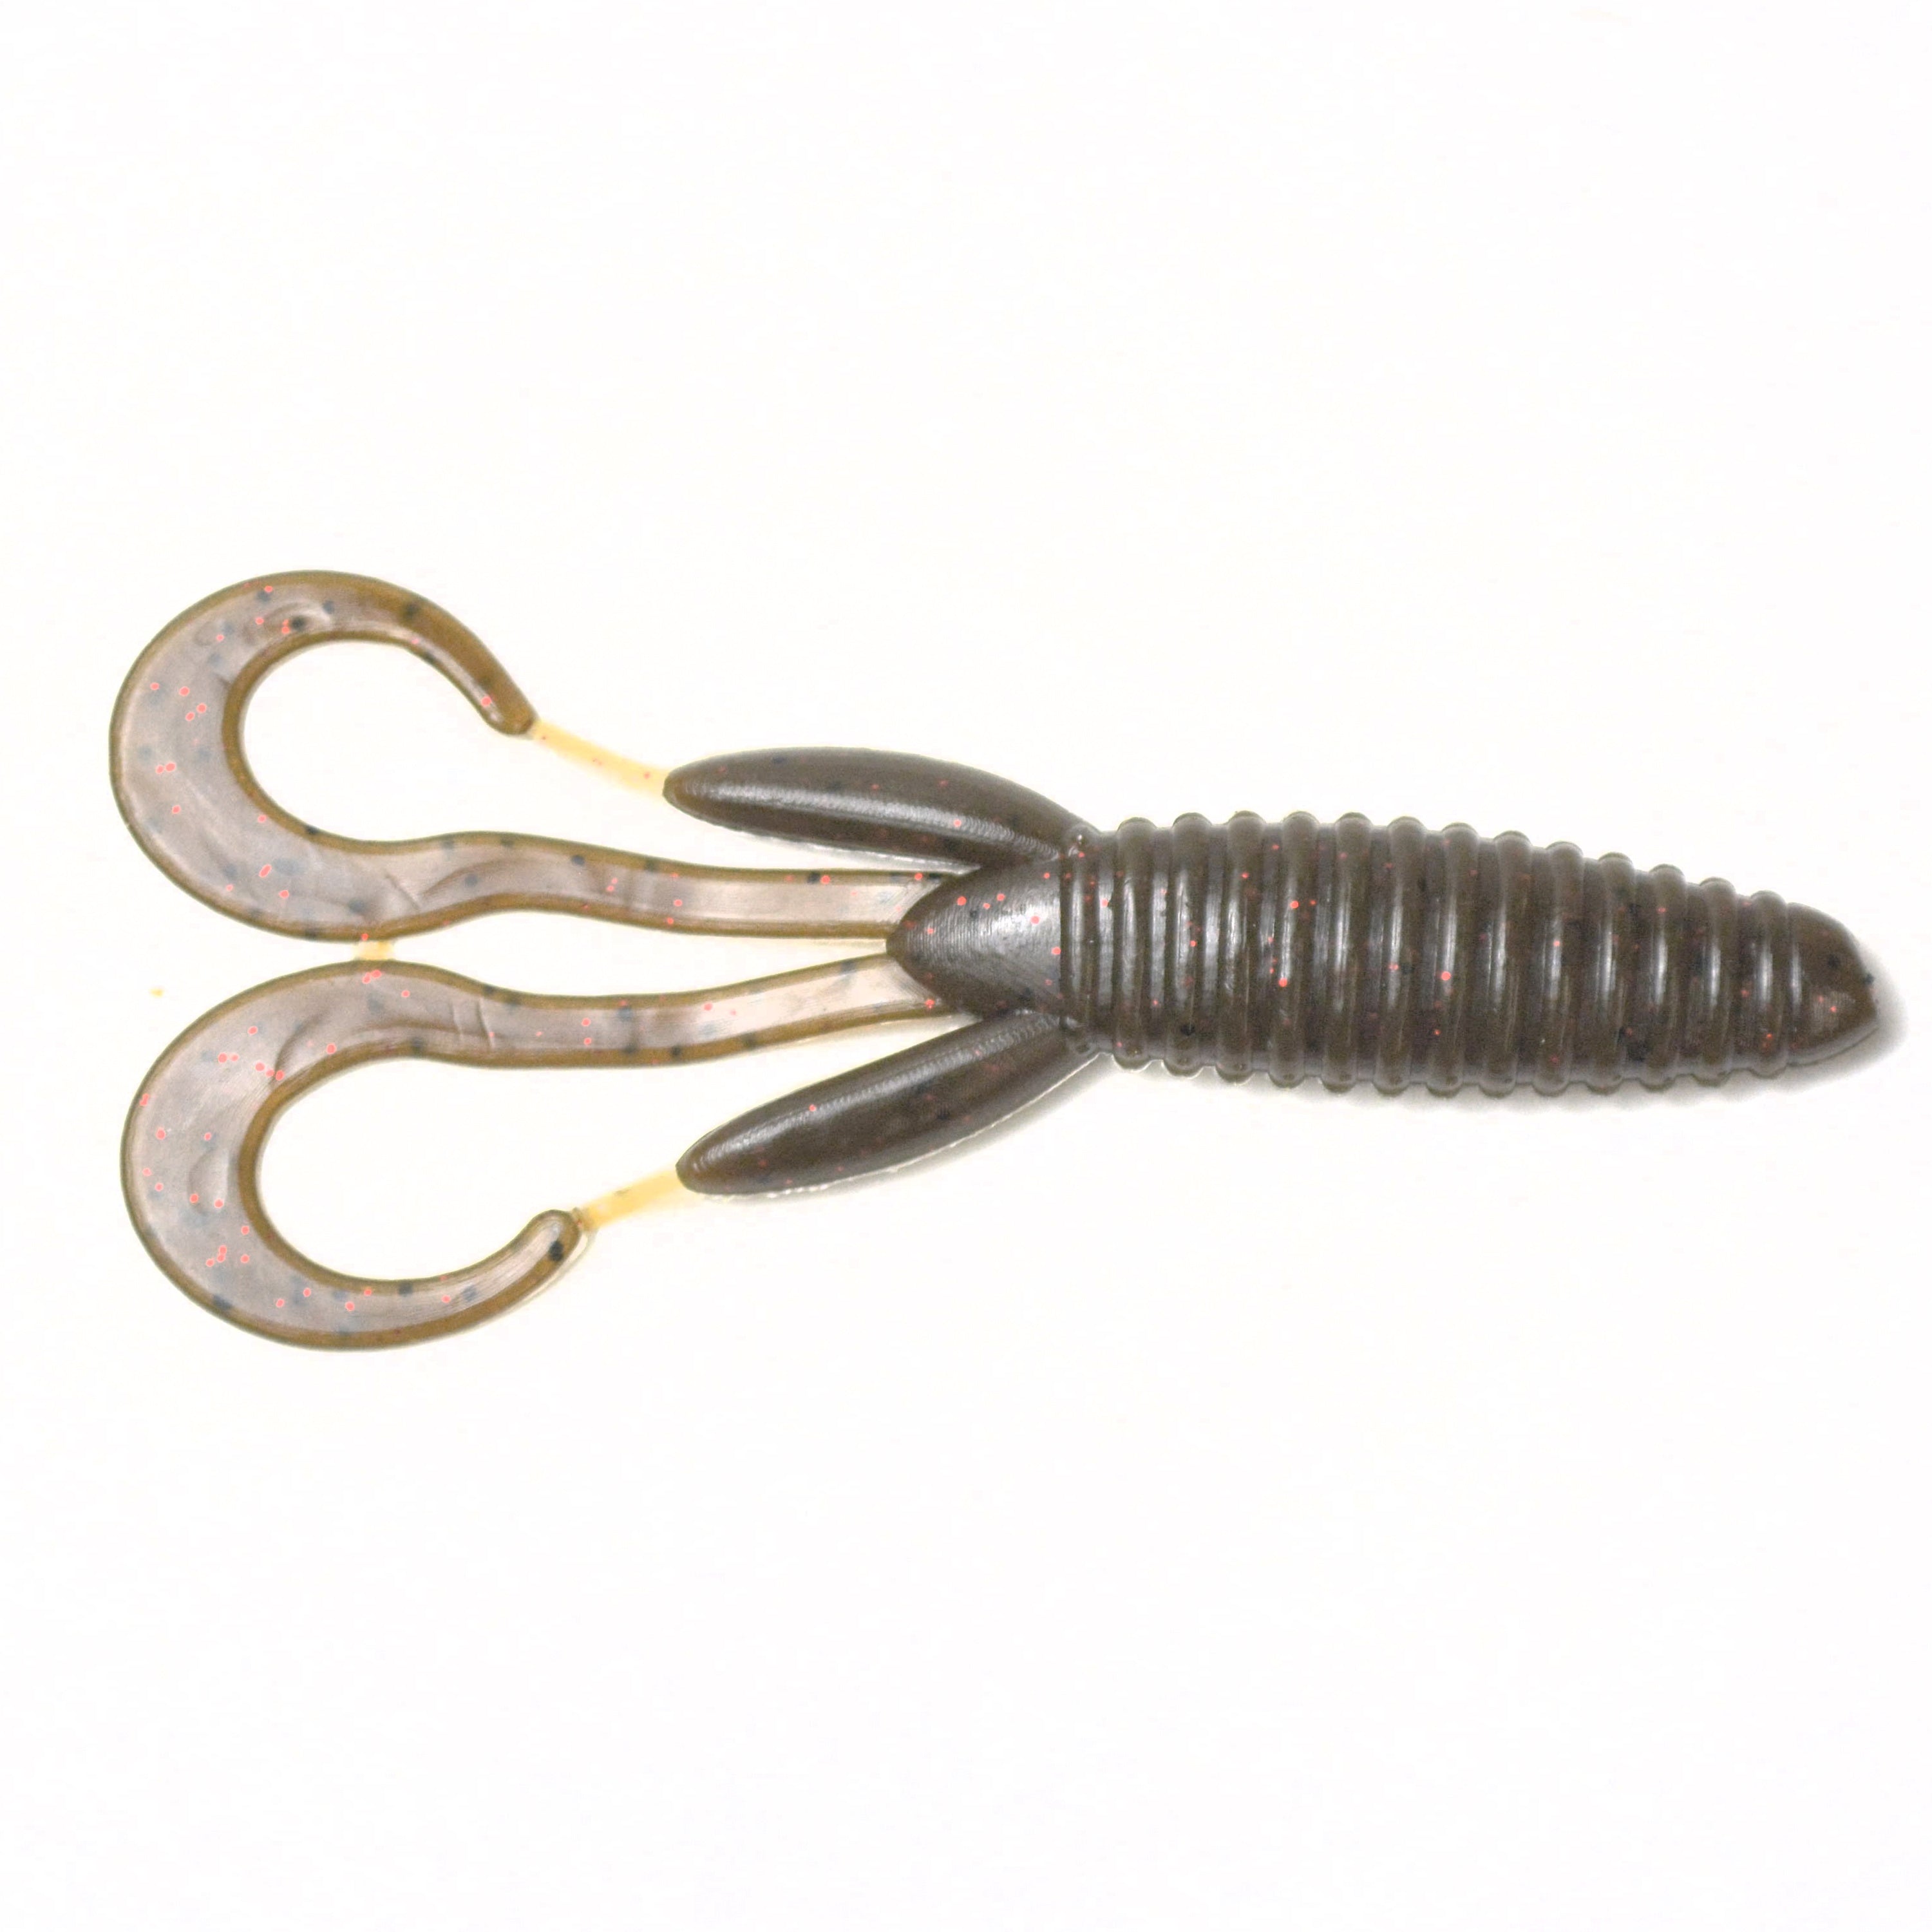  Harmony Fishing - Tungsten Flipping Weights (Chip